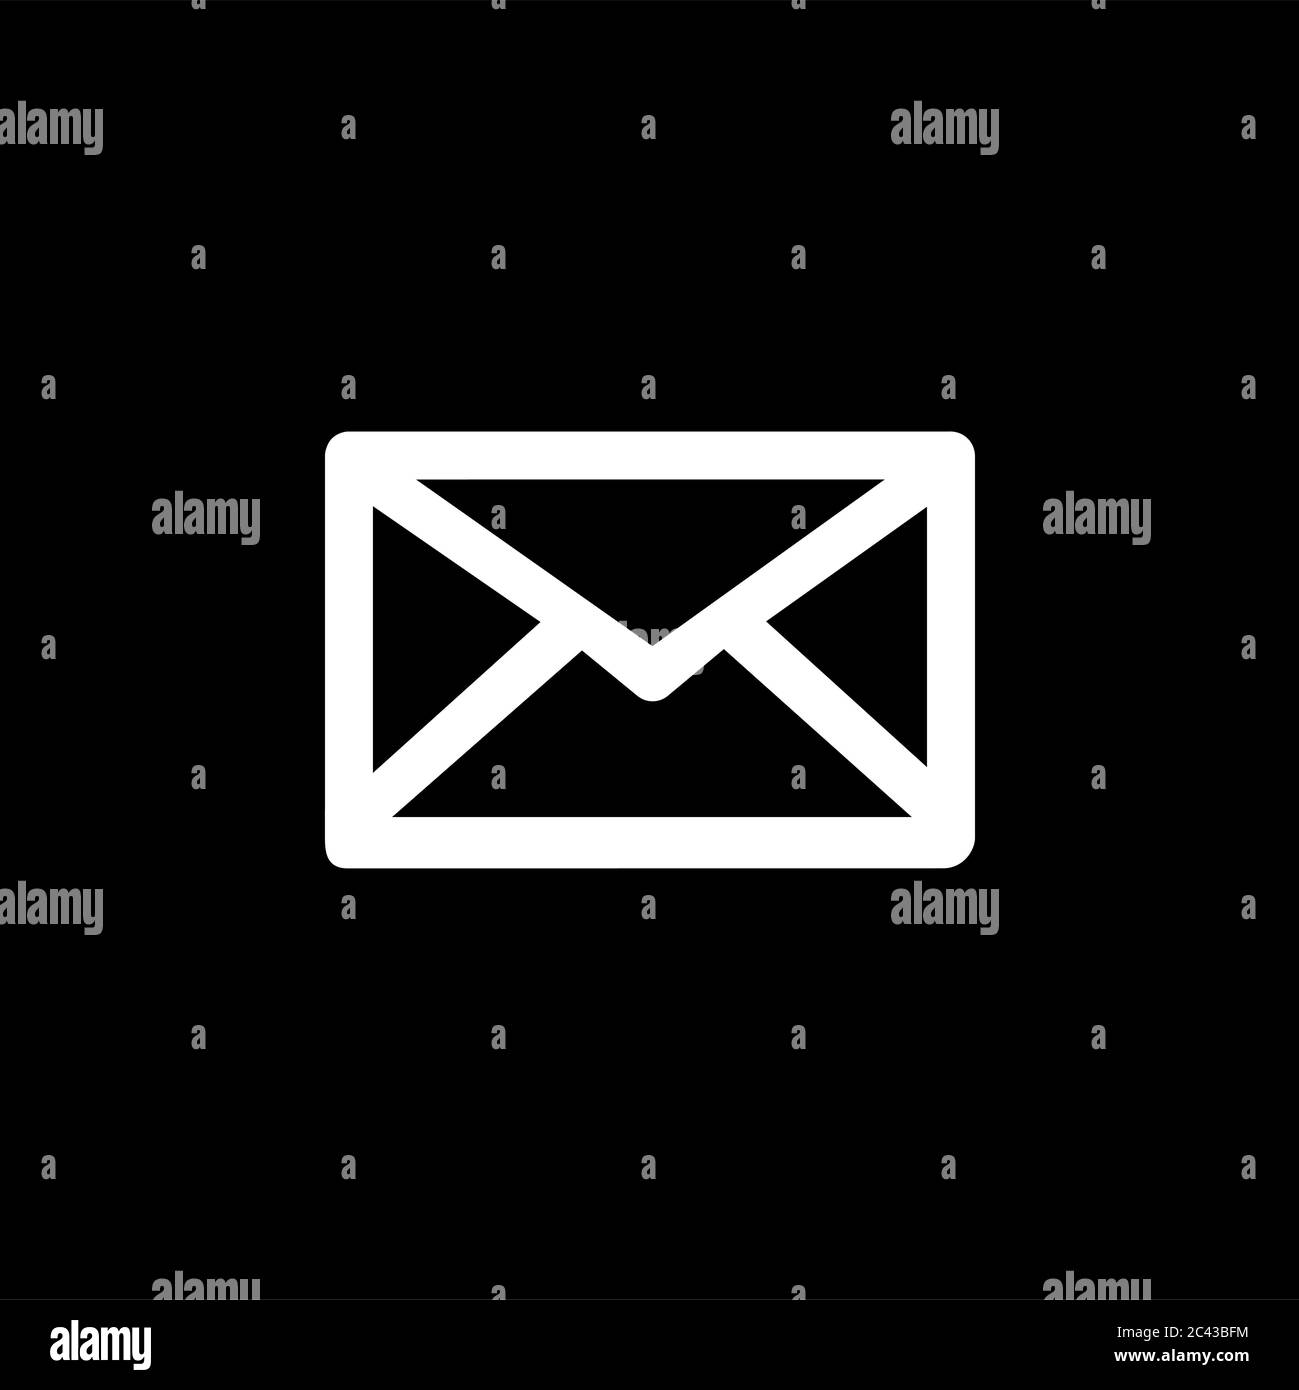 Email Icon On Black Background. Black Flat Style Vector ...